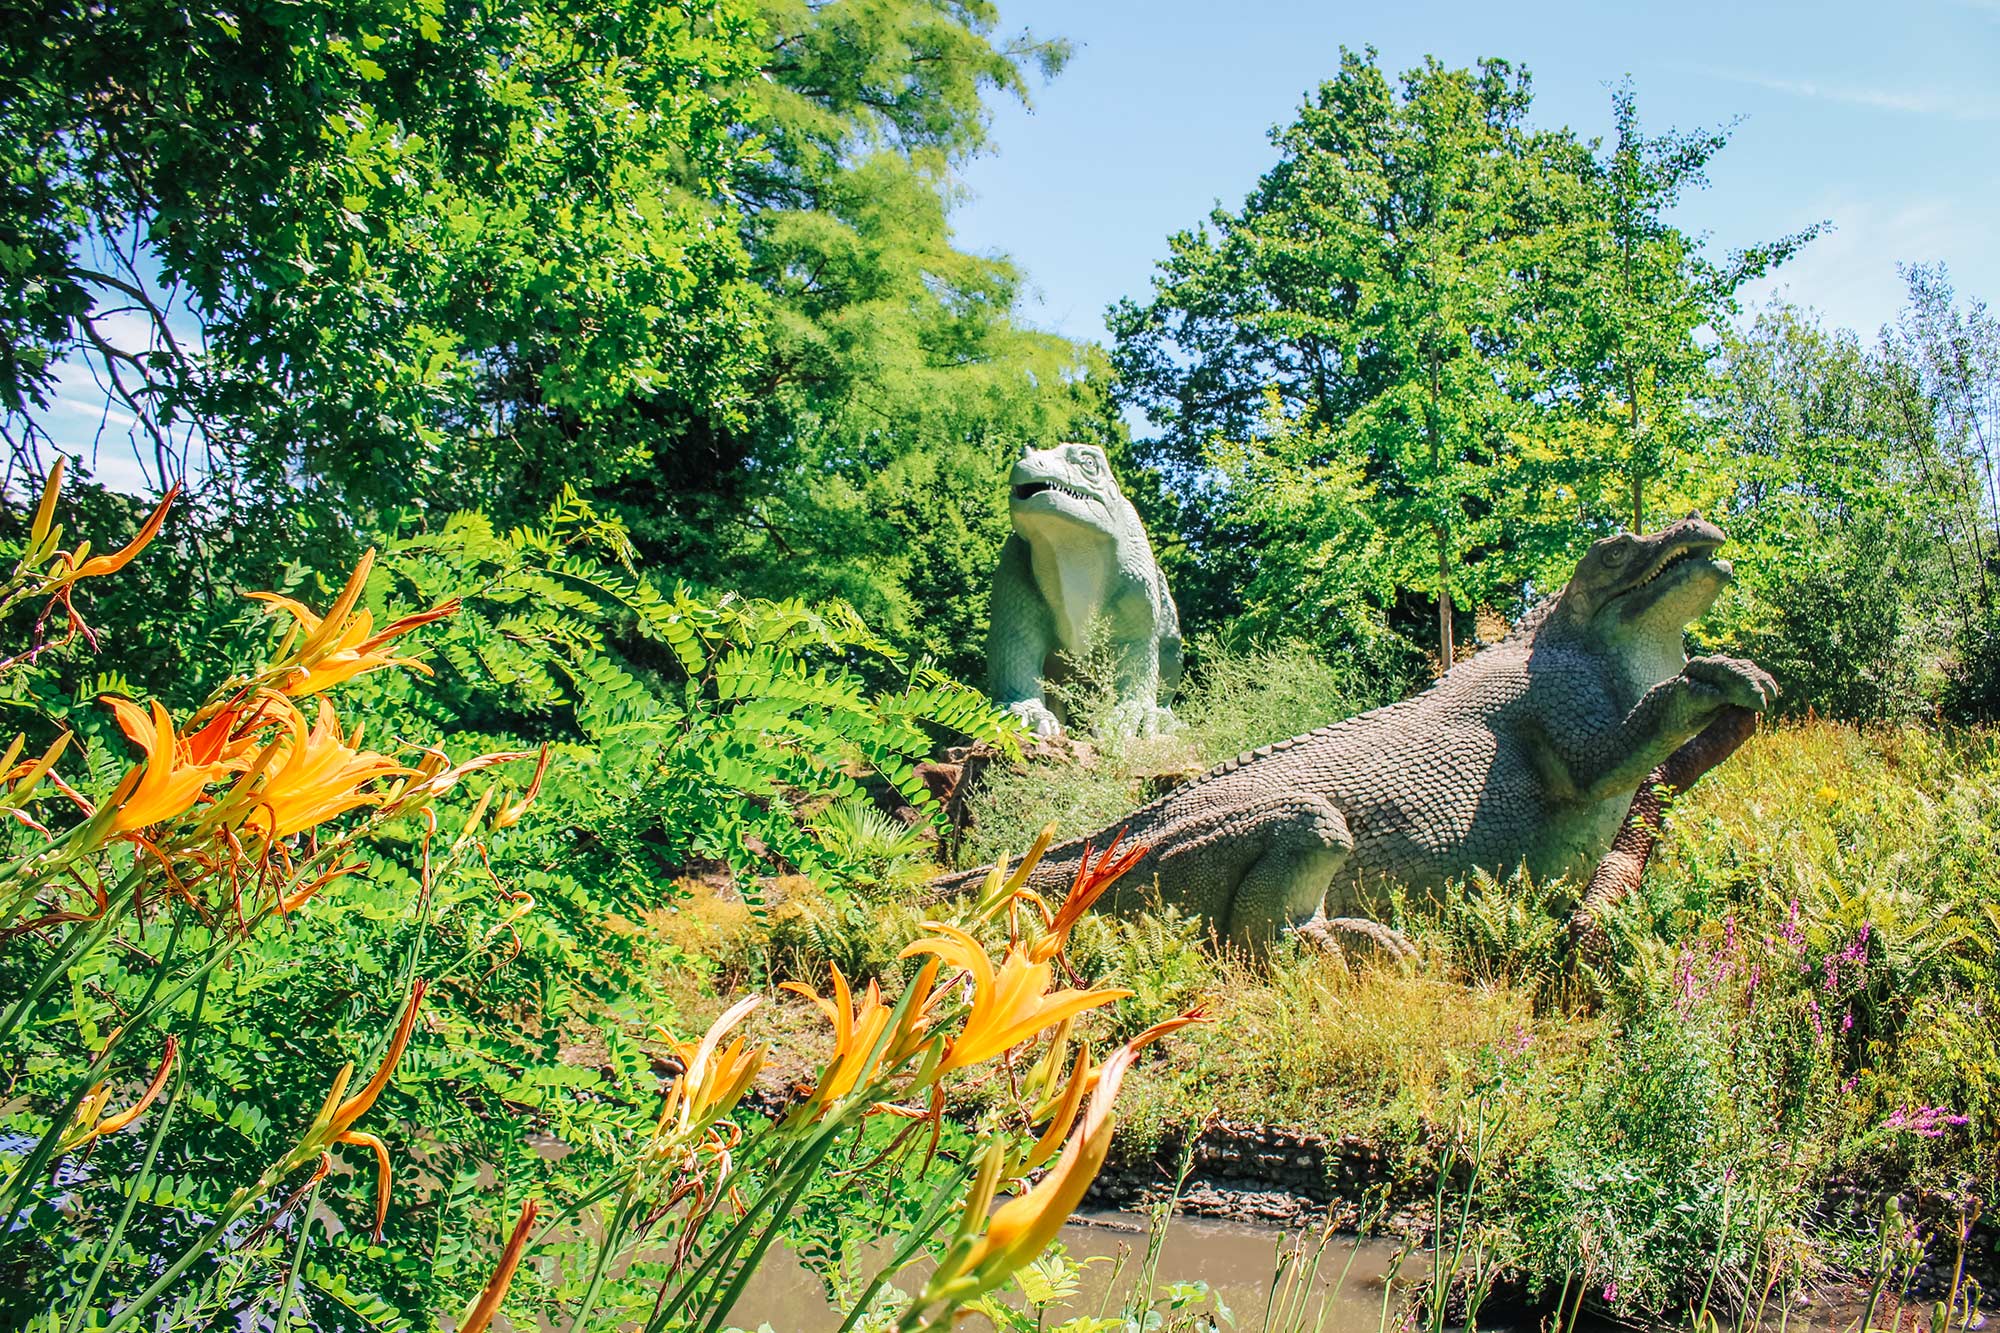 Crystal Palace Dinosaurs And More London Park Guide Ck Travels